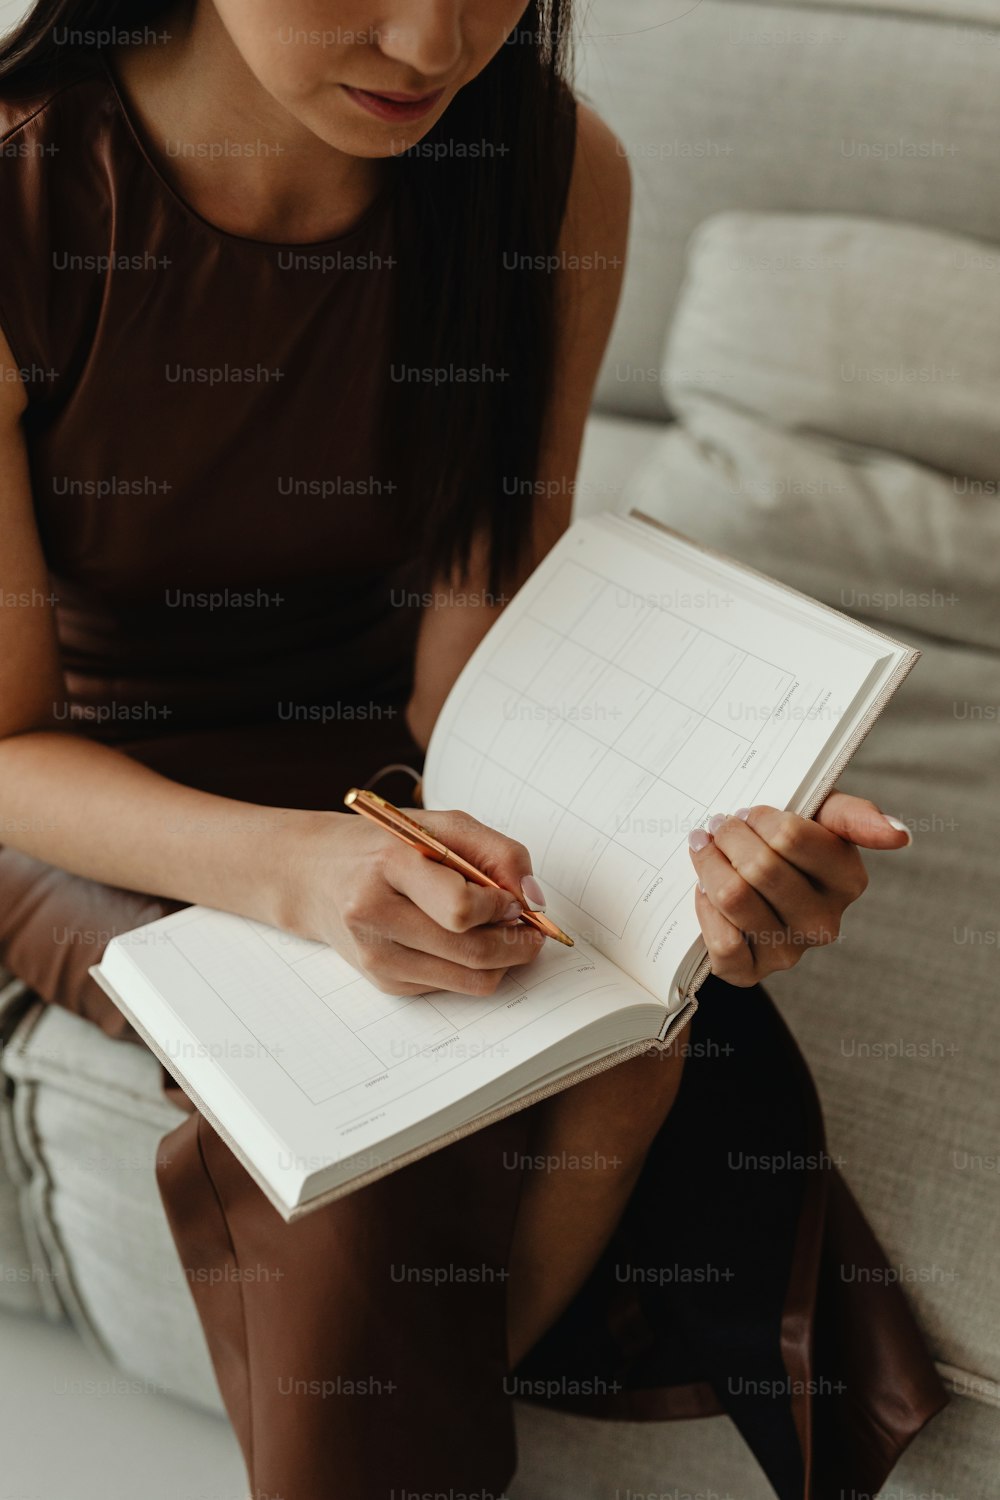 a woman sitting on a couch writing on a book